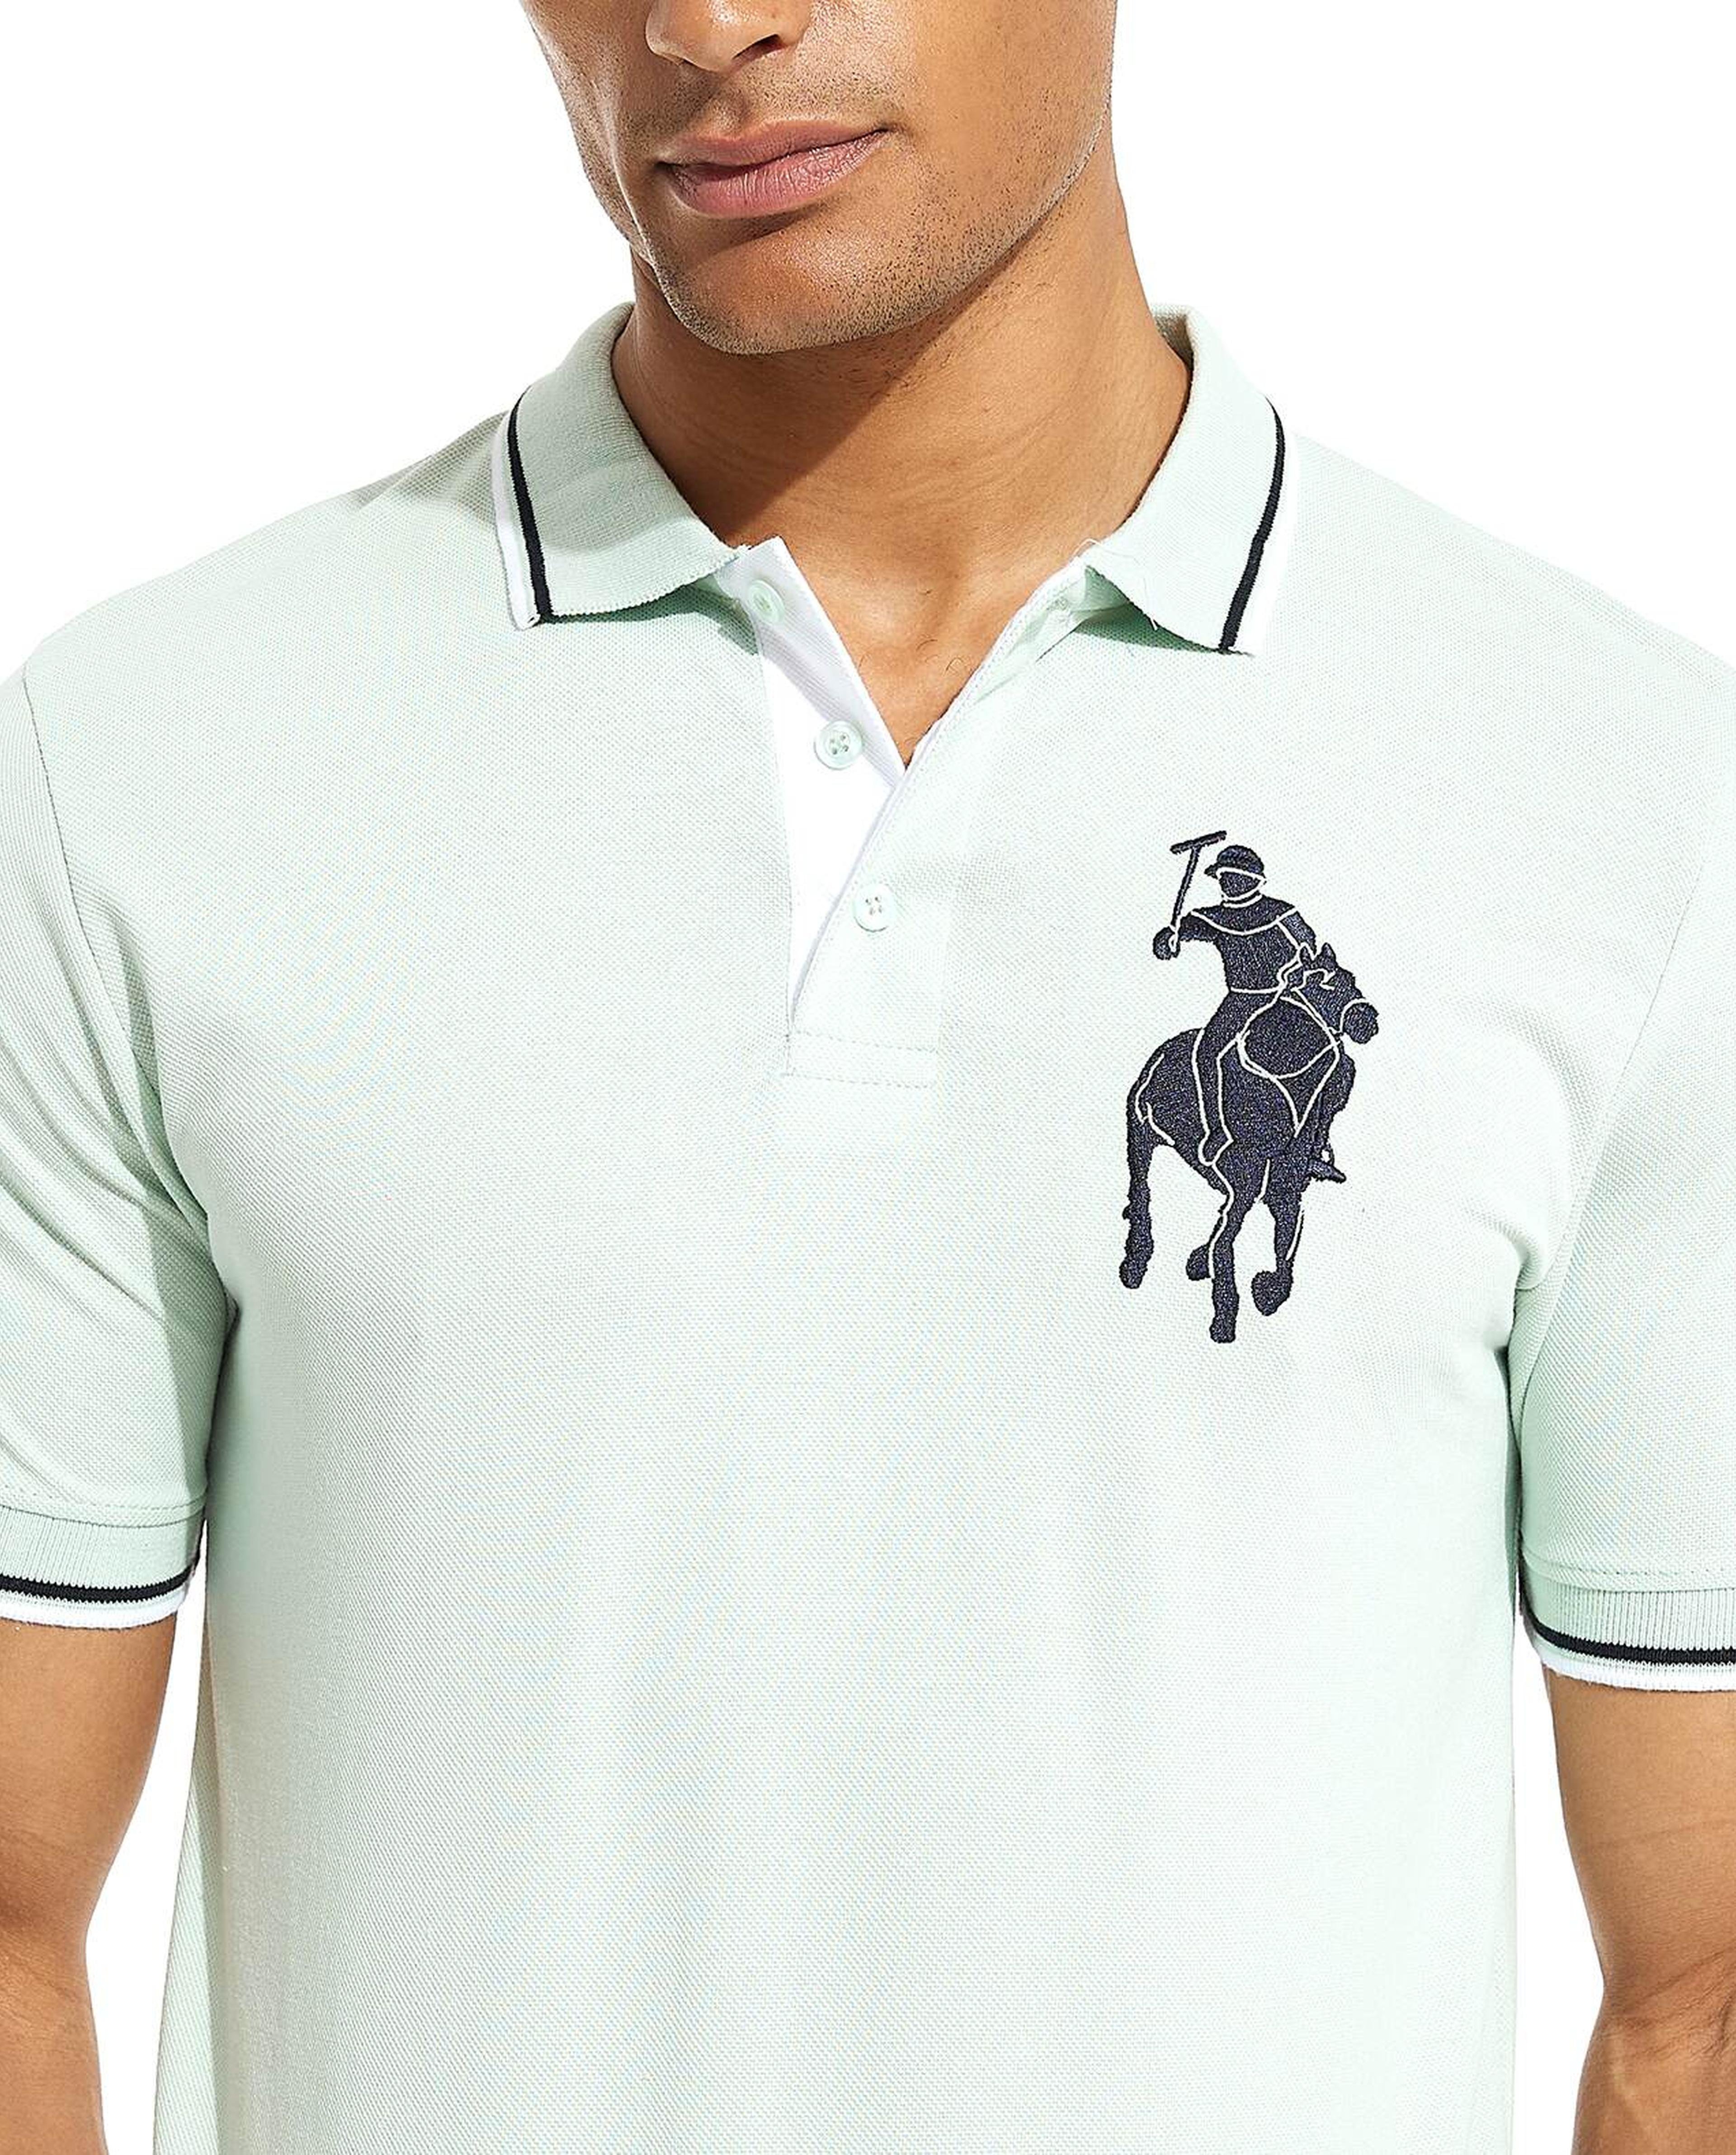 Logo Embroidered Polo T-Shirt with Short Sleeves